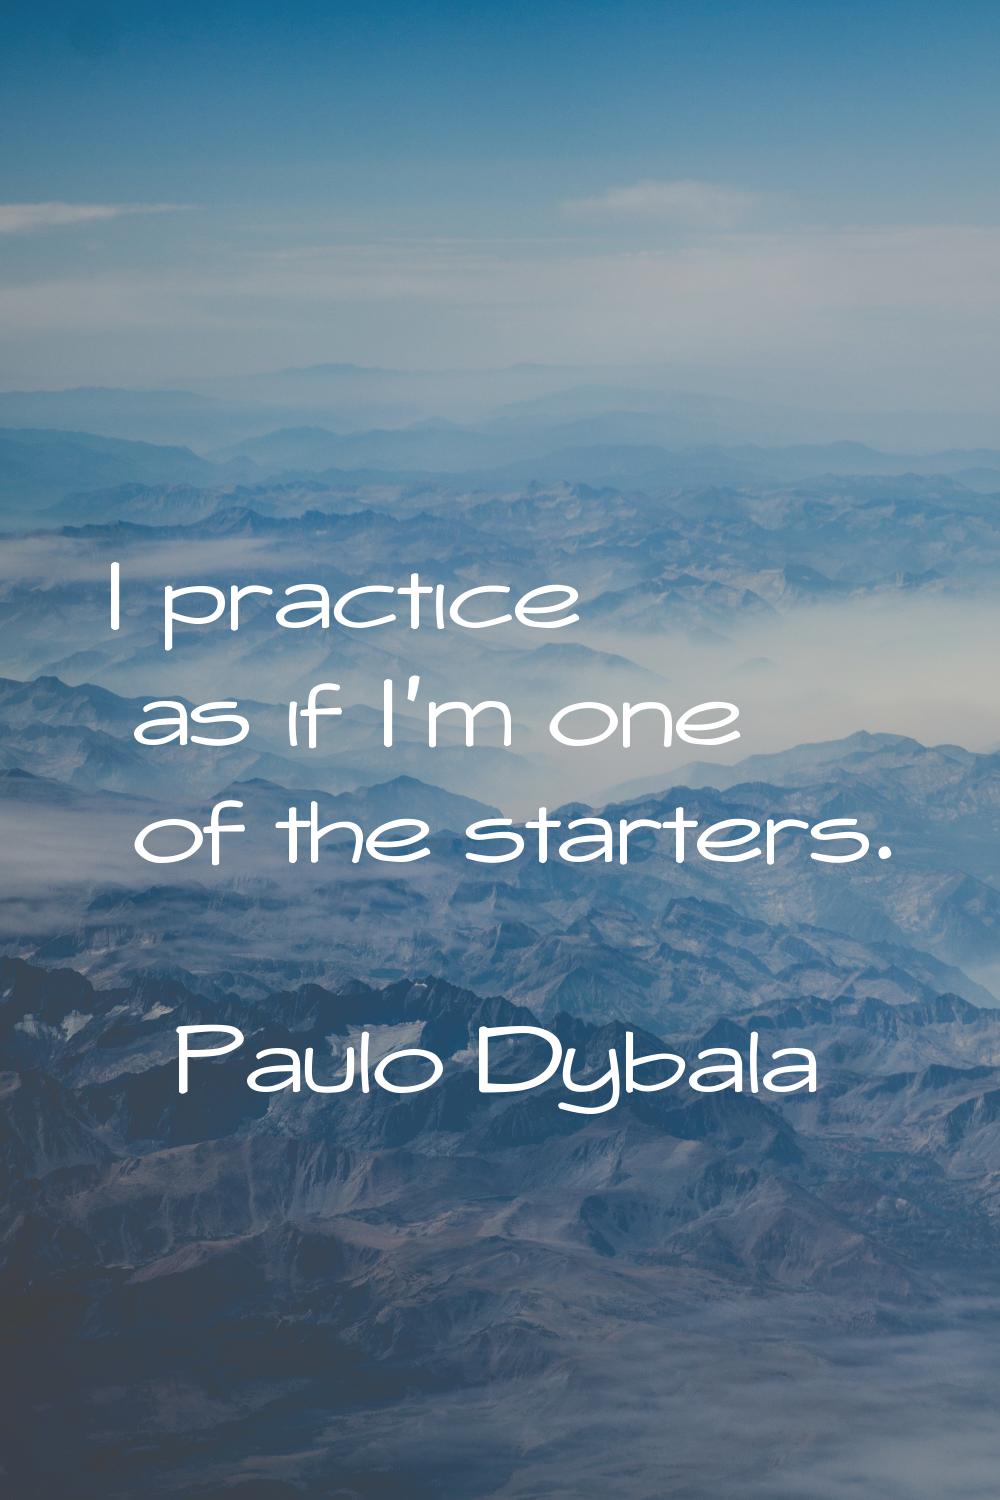 I practice as if I'm one of the starters.